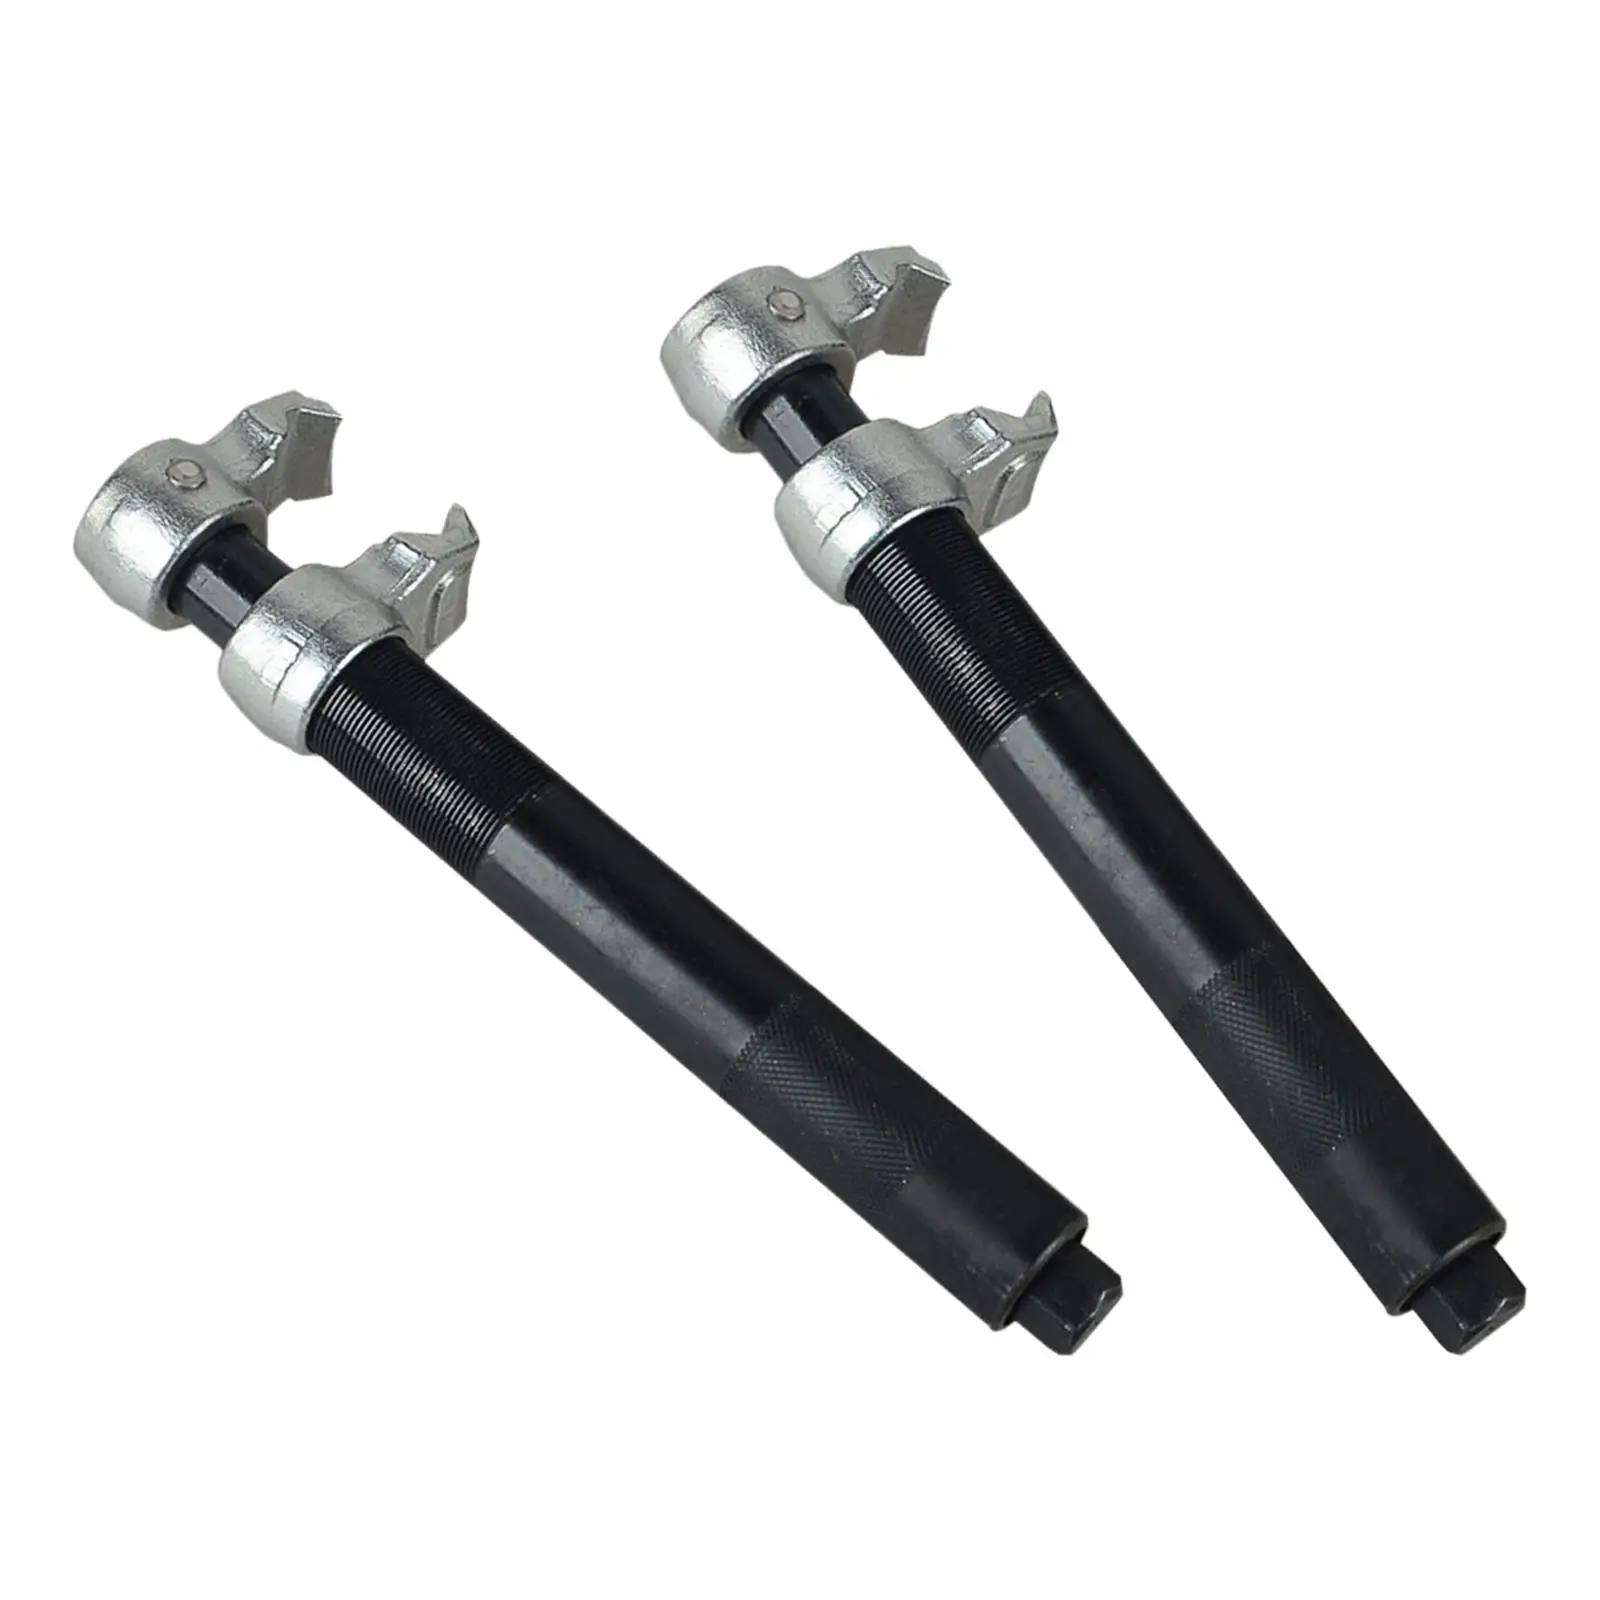 Compressor Adjustable Direct Replaces Spare Parts Spring Struts Shocks with 2 Steel Jaw Claws Spring Spacer